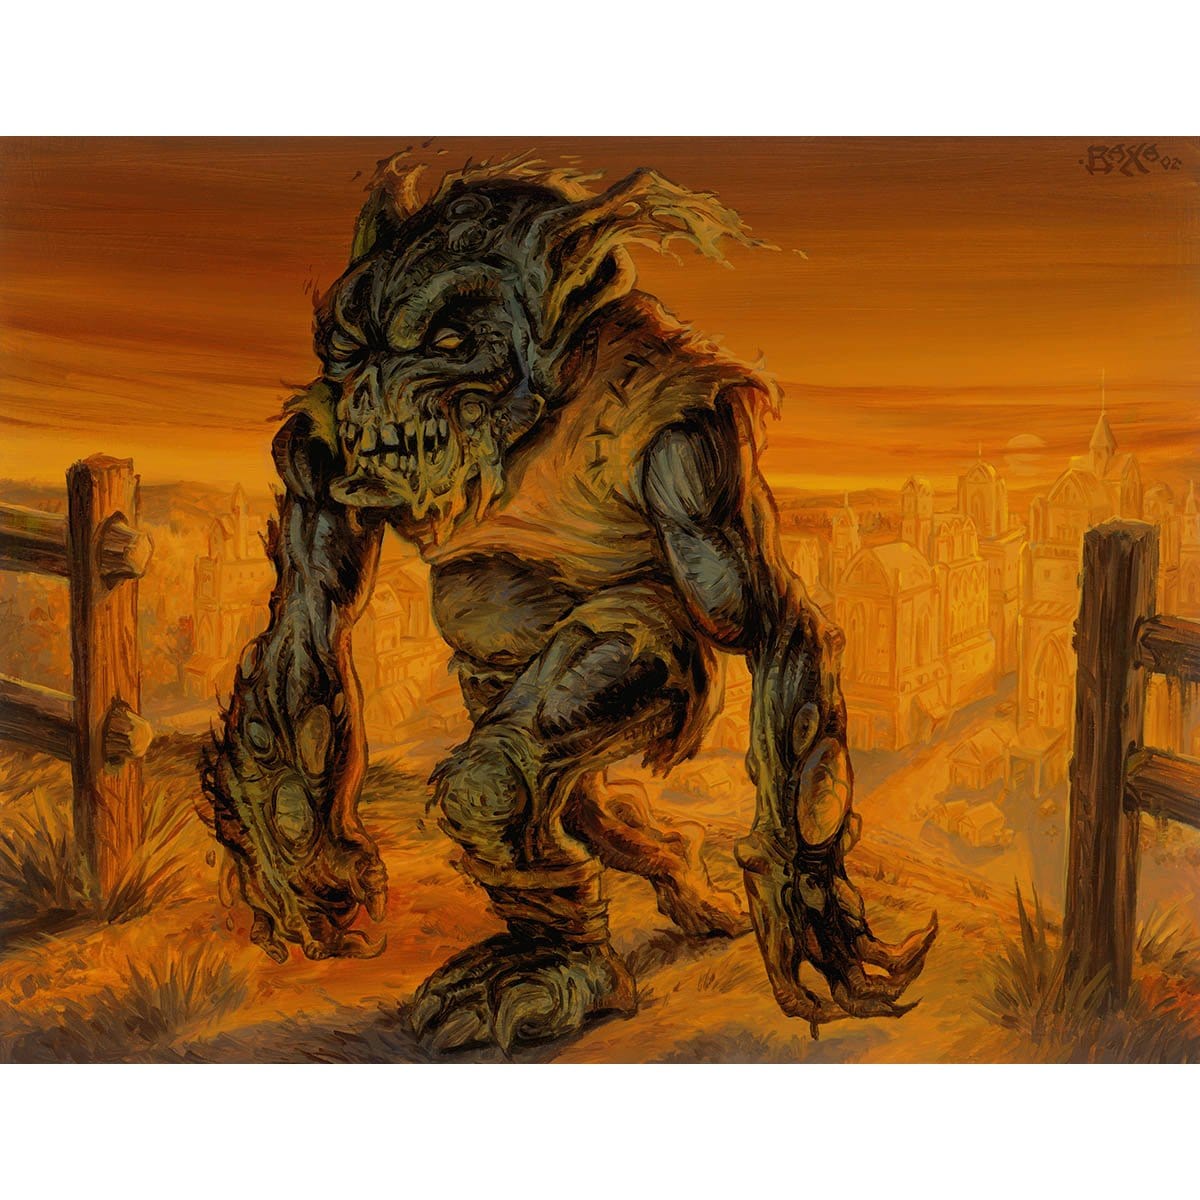 Festering Goblin Print - Print - Original Magic Art - Accessories for Magic the Gathering and other card games